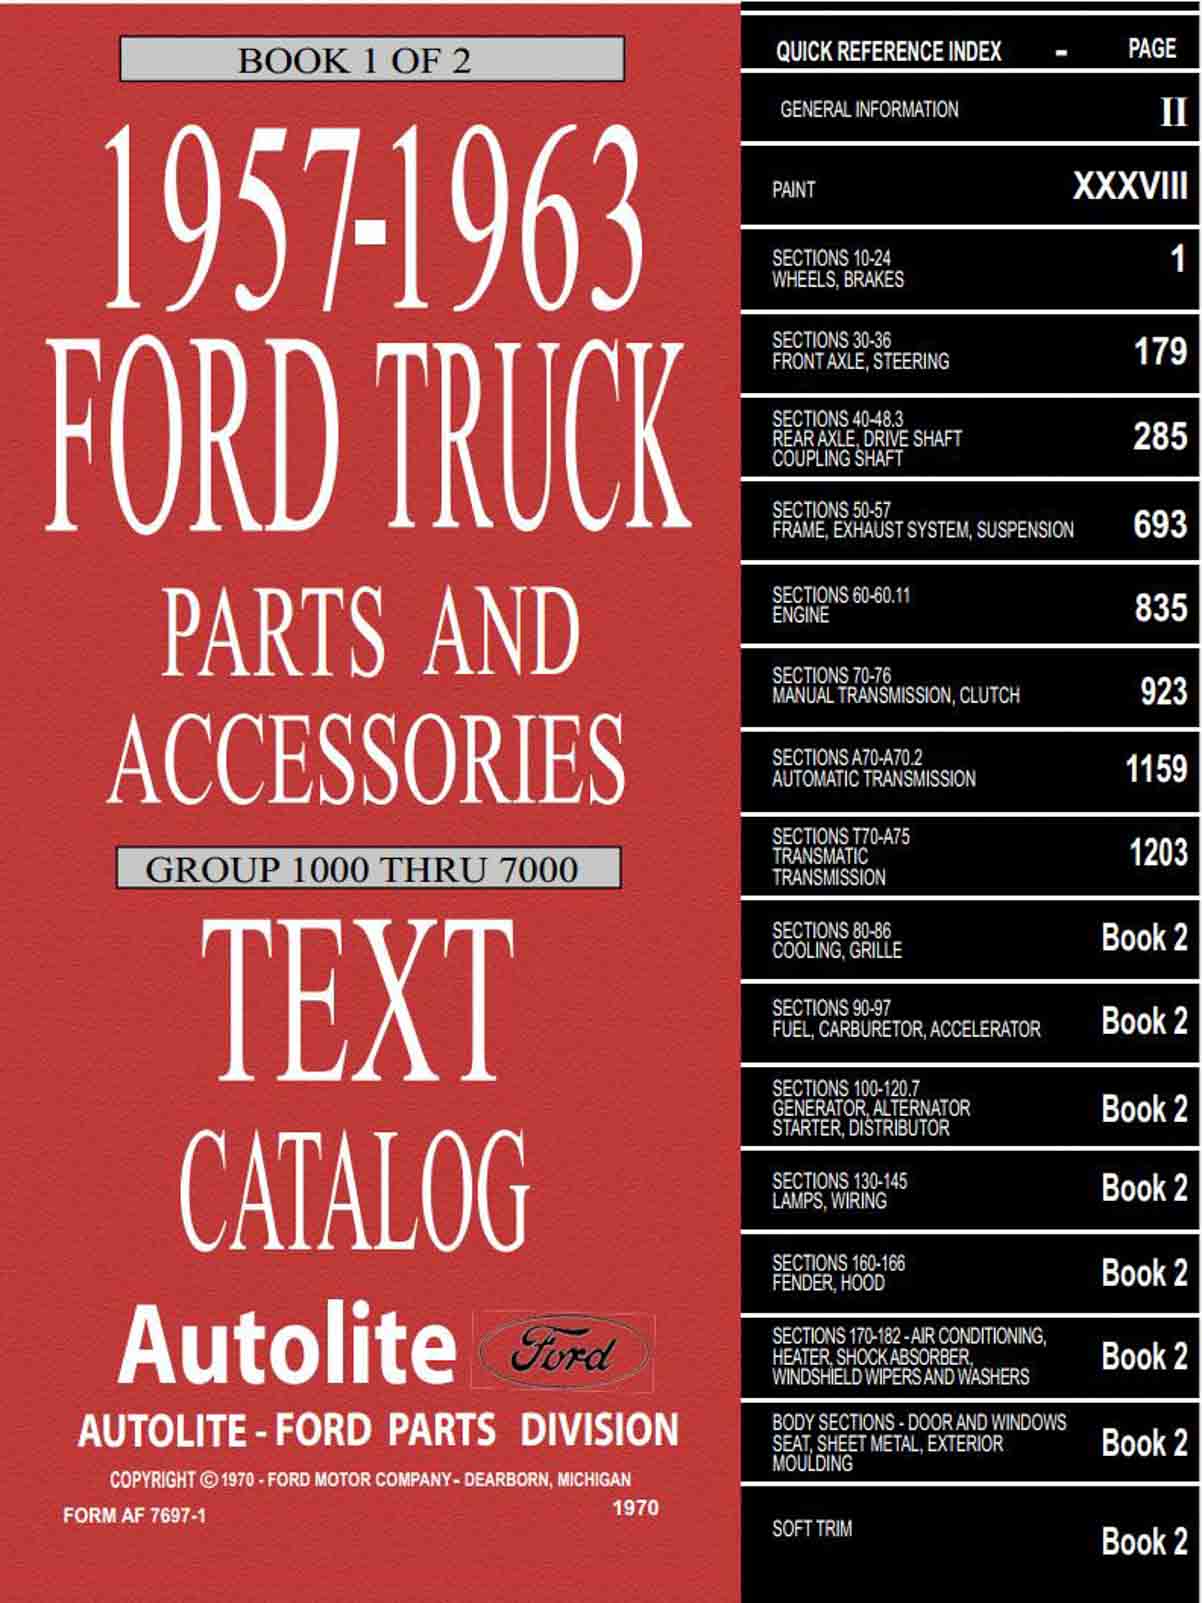 1957-1963 Ford Truck Parts Catalog